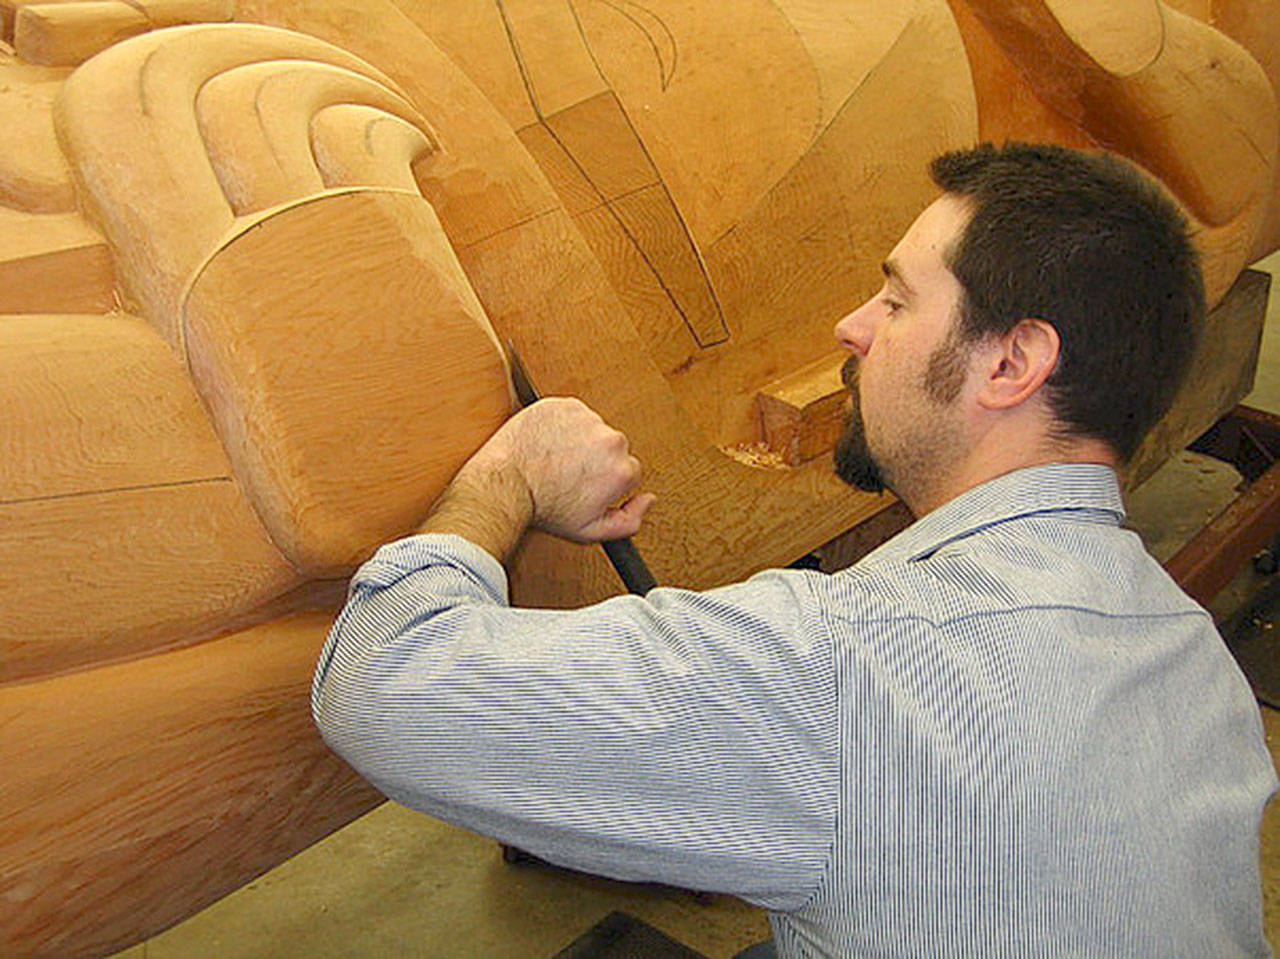 Nathan Gilles will discuss Northwest Native art this Thursday at the monthly meeting of Fishin’ Club Whidbey Island.(Photo provided)